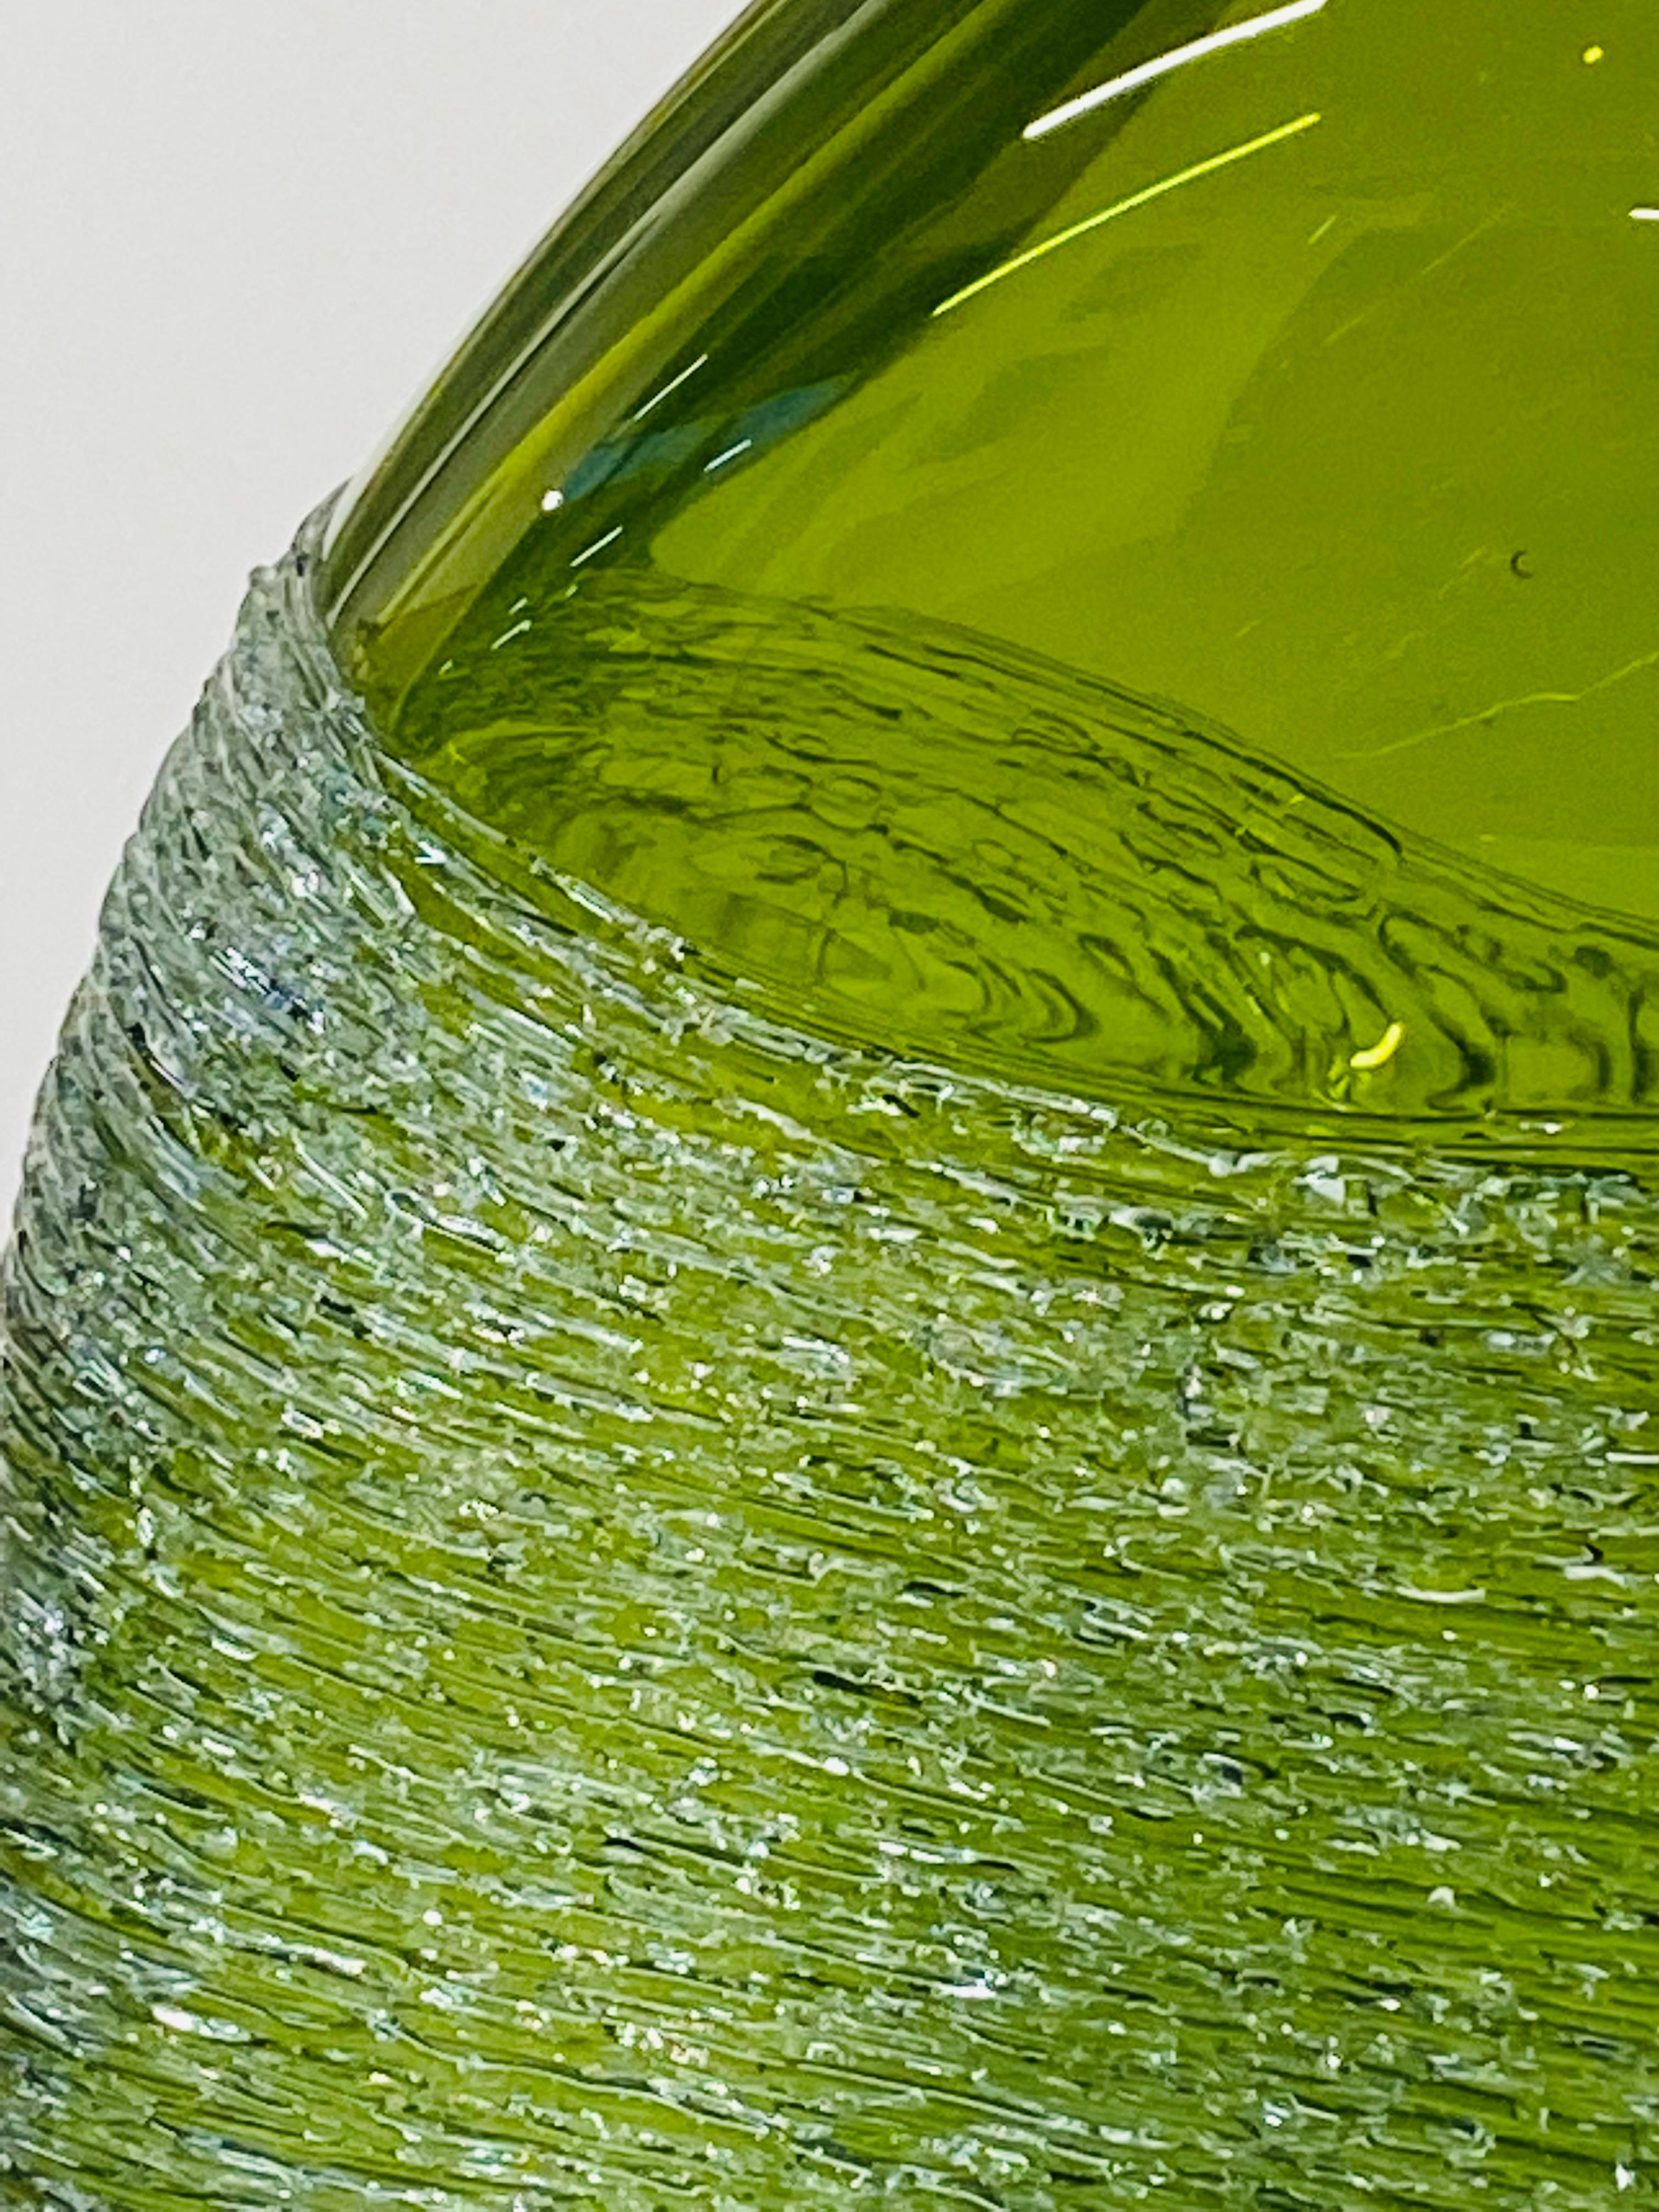 Bibi Smit
Luminous Fruit, green
H30cm-30cm-D12cm 
Blown glass

Bibi Smit (b. 1965) lives and works in the Netherlands. She is a glass artist and designer. She feels the need to control all the processes, from the idea and the design to the blowing,